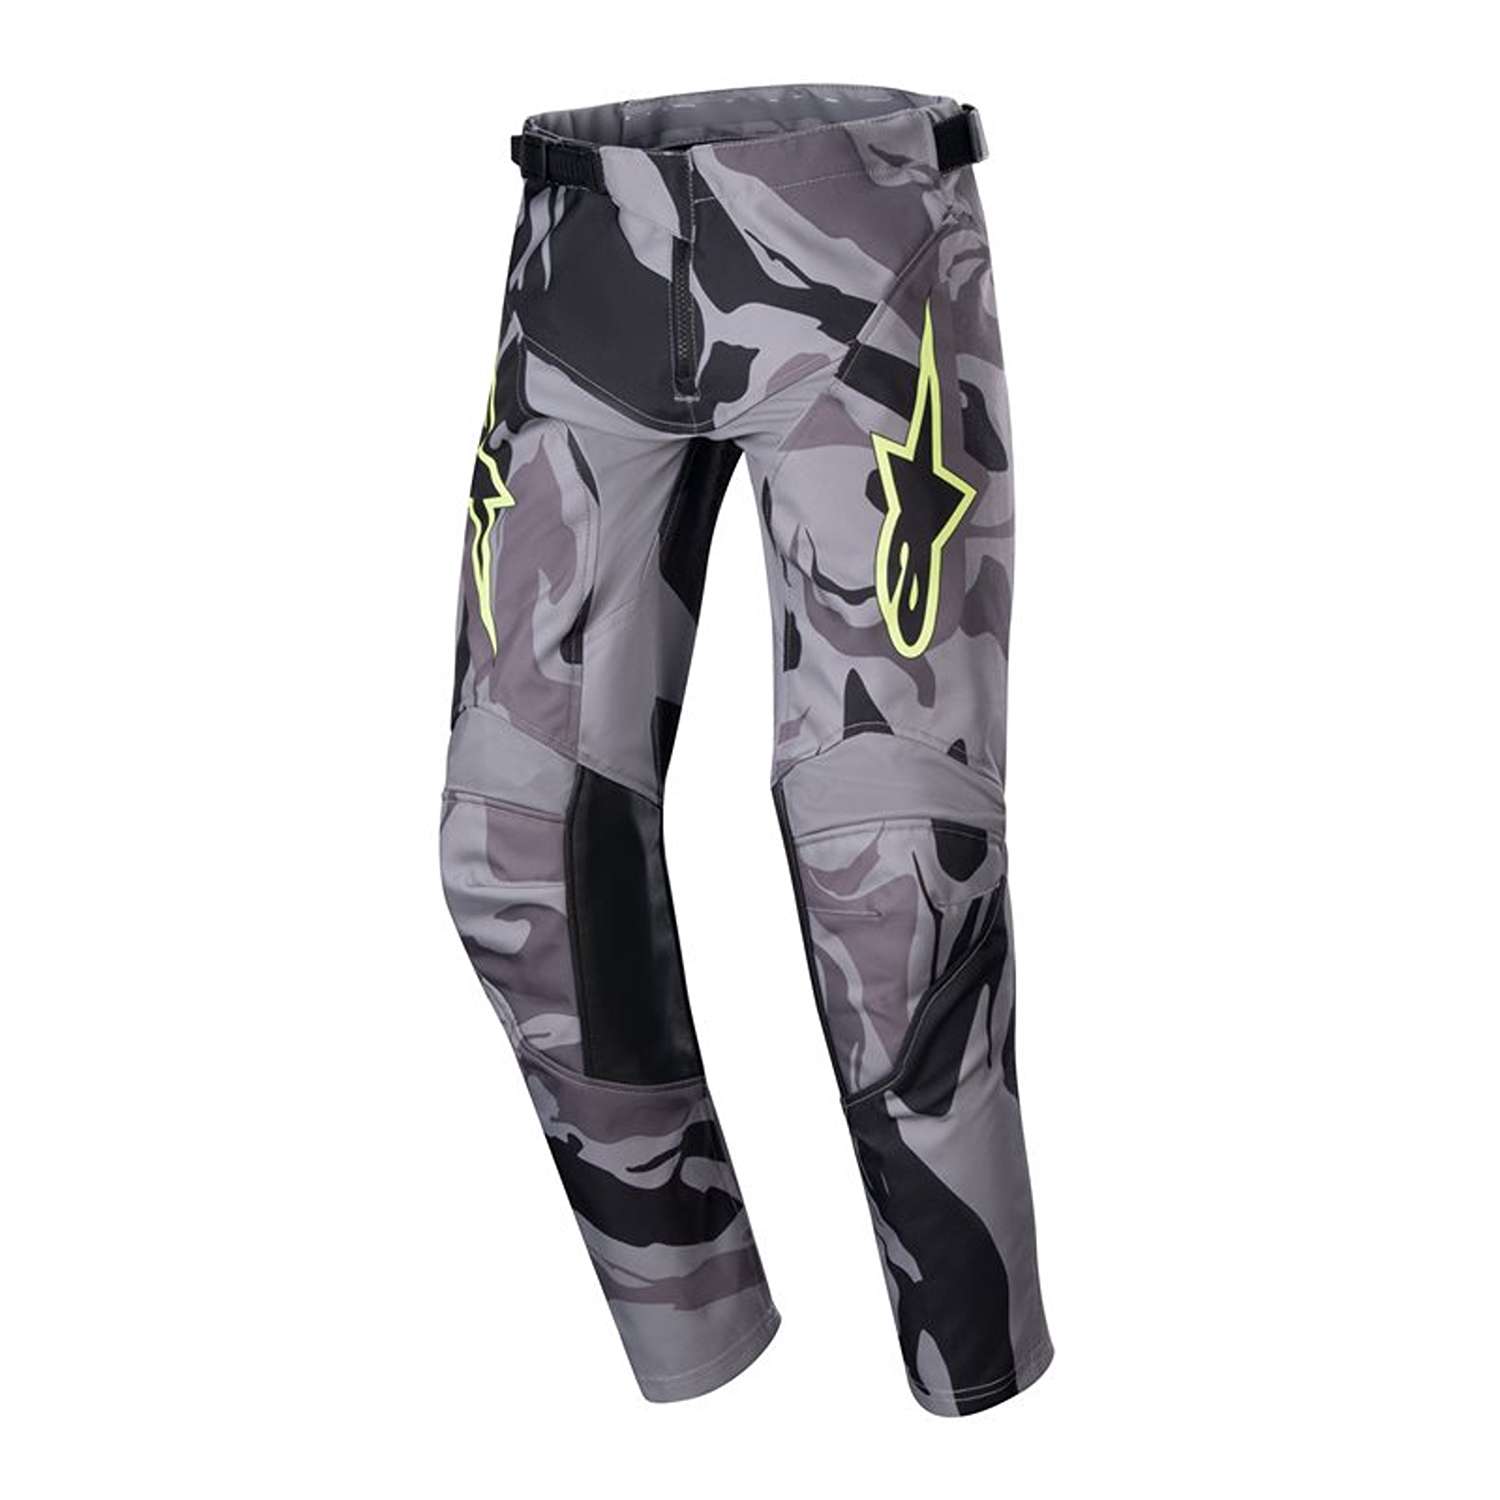 Image of Alpinestars Youth Racer Tactical Pants Cast Gray Camo Magnet Size 22 EN